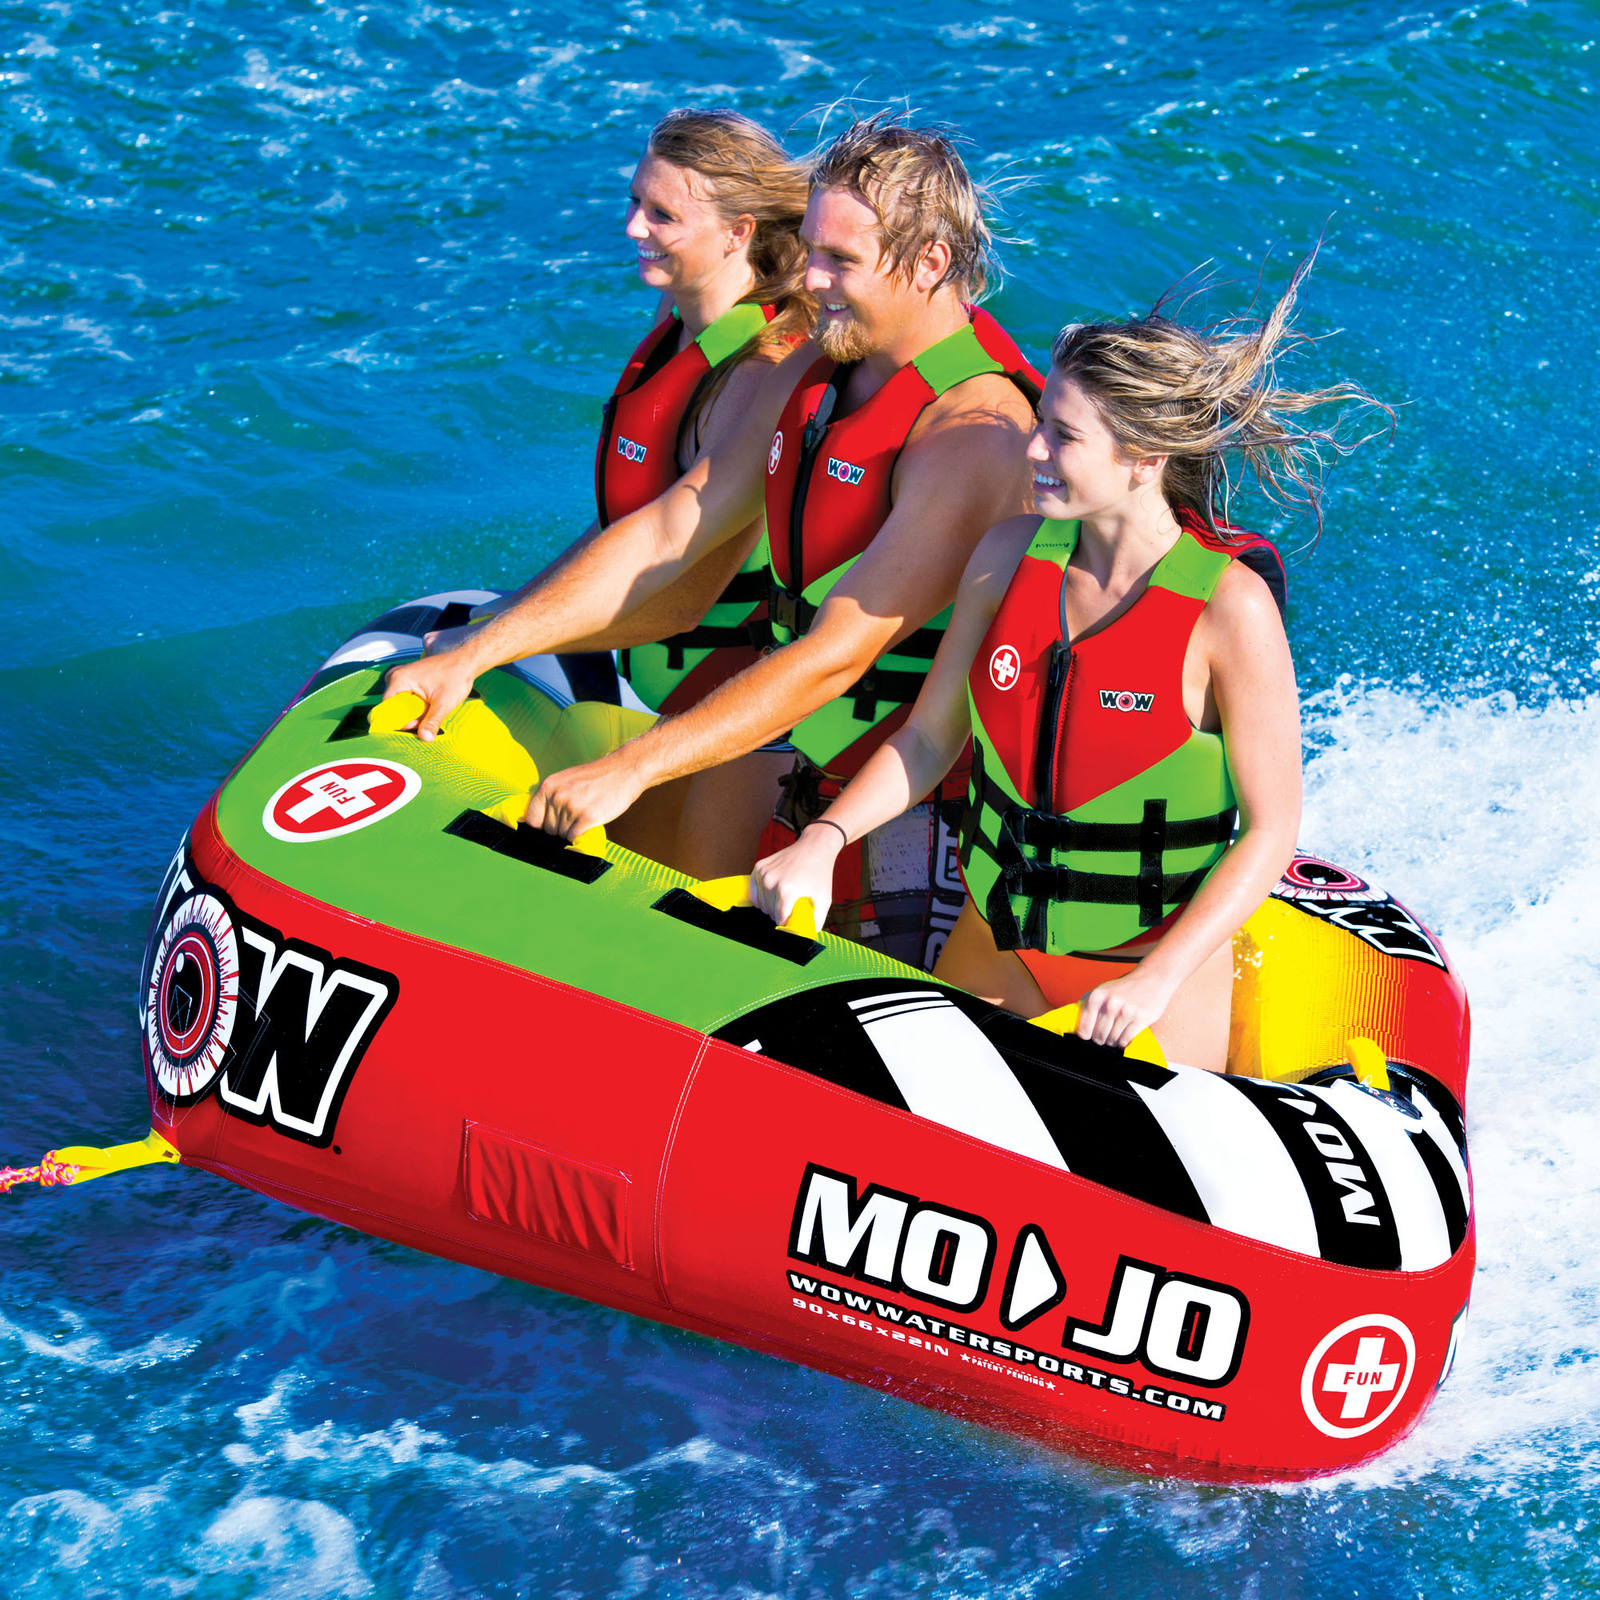 WOW WATERSPORTS MOJO 13 PERSON INFLATABLE TOWABLE SKI TUBE (161070)